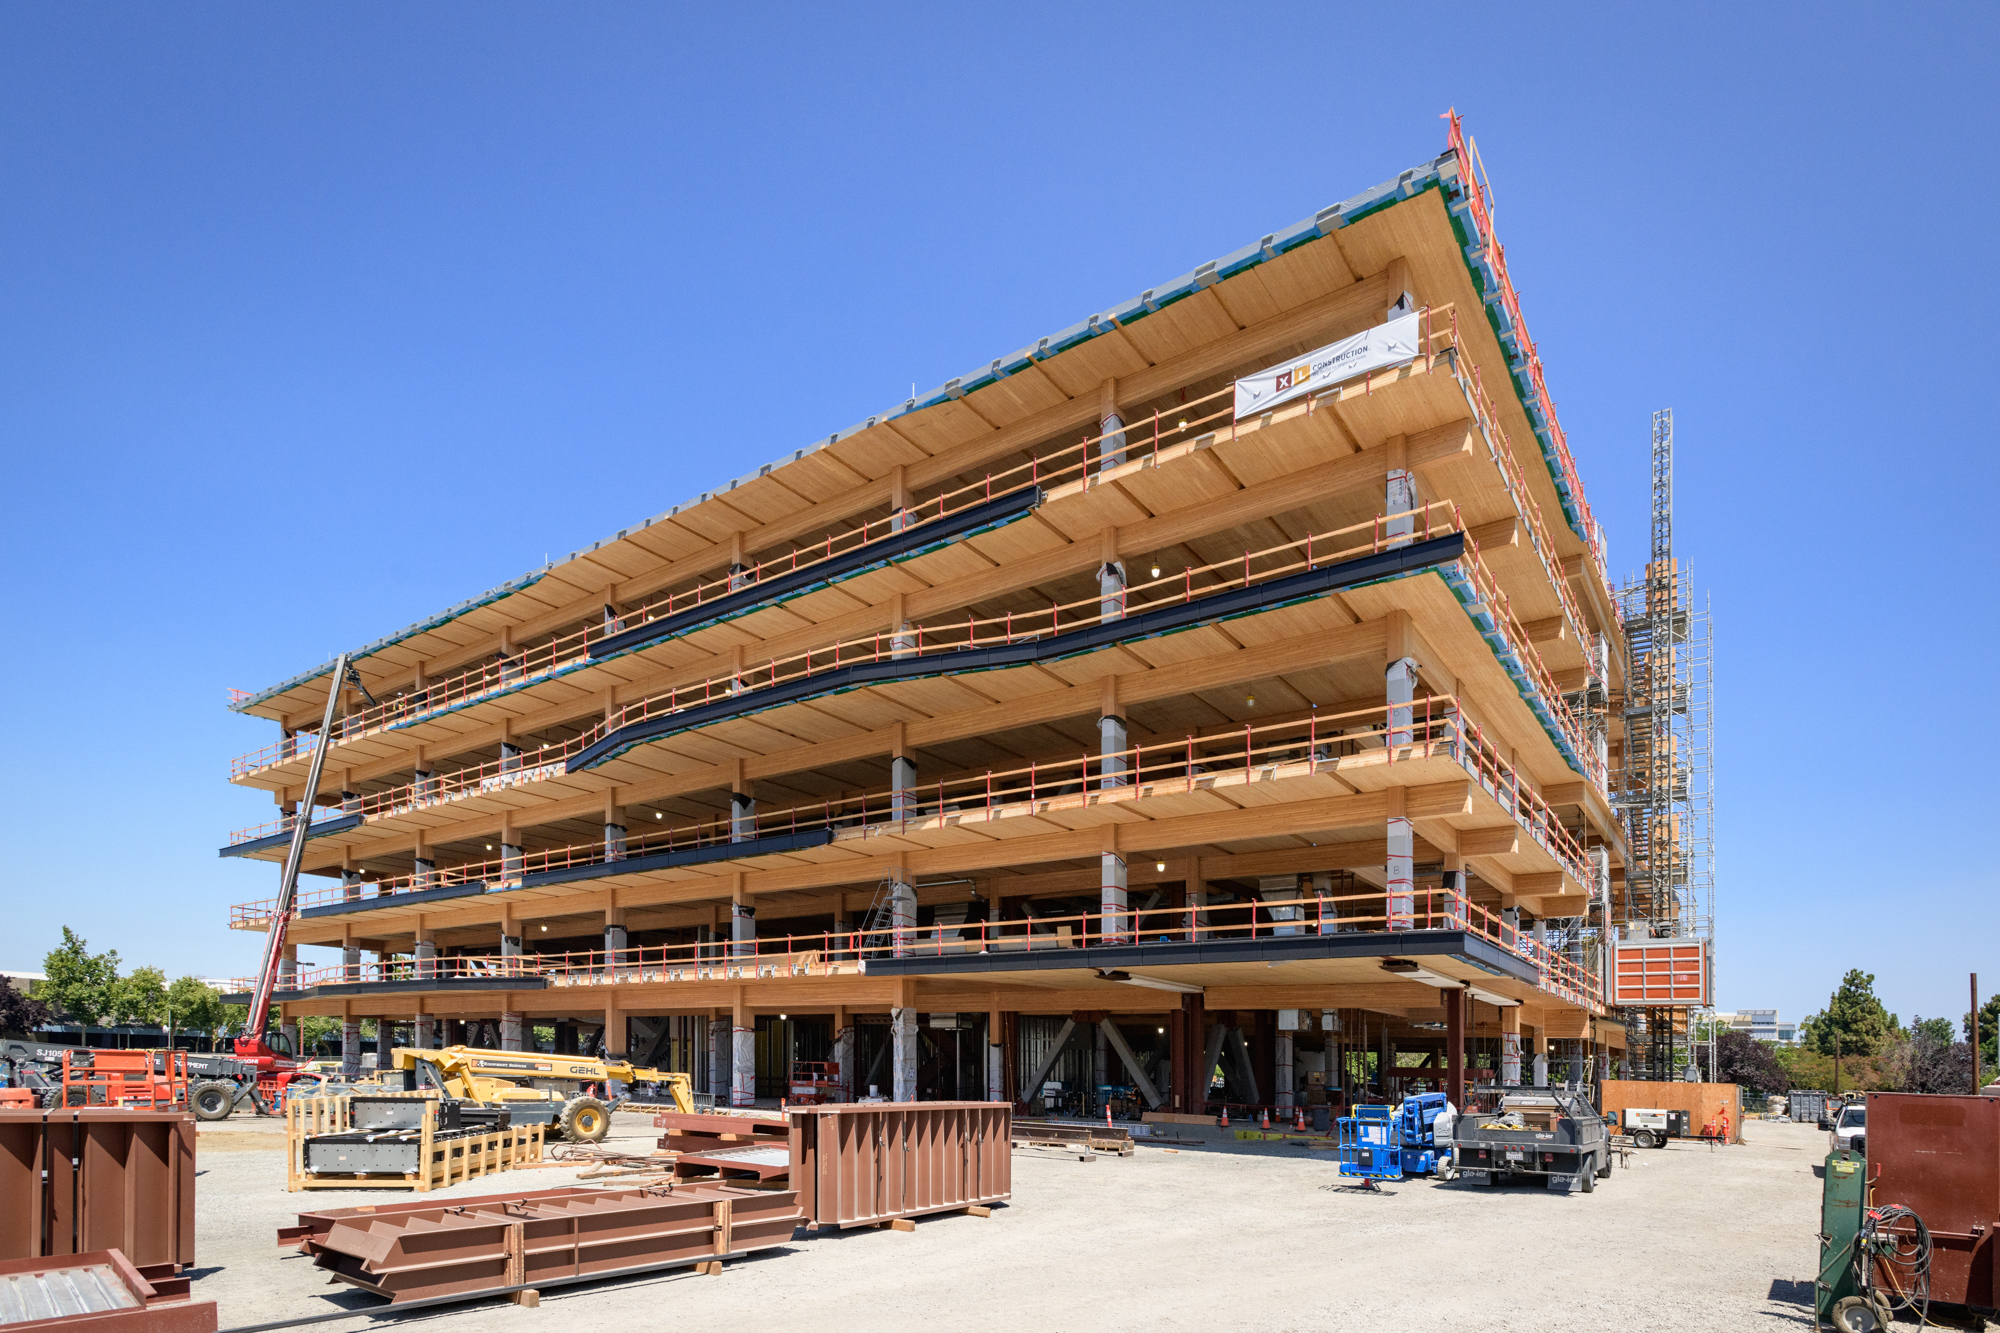 A mass timber office building under construction in Sunnyvale, Calif. Photo: George Baker, Golden State Photographic